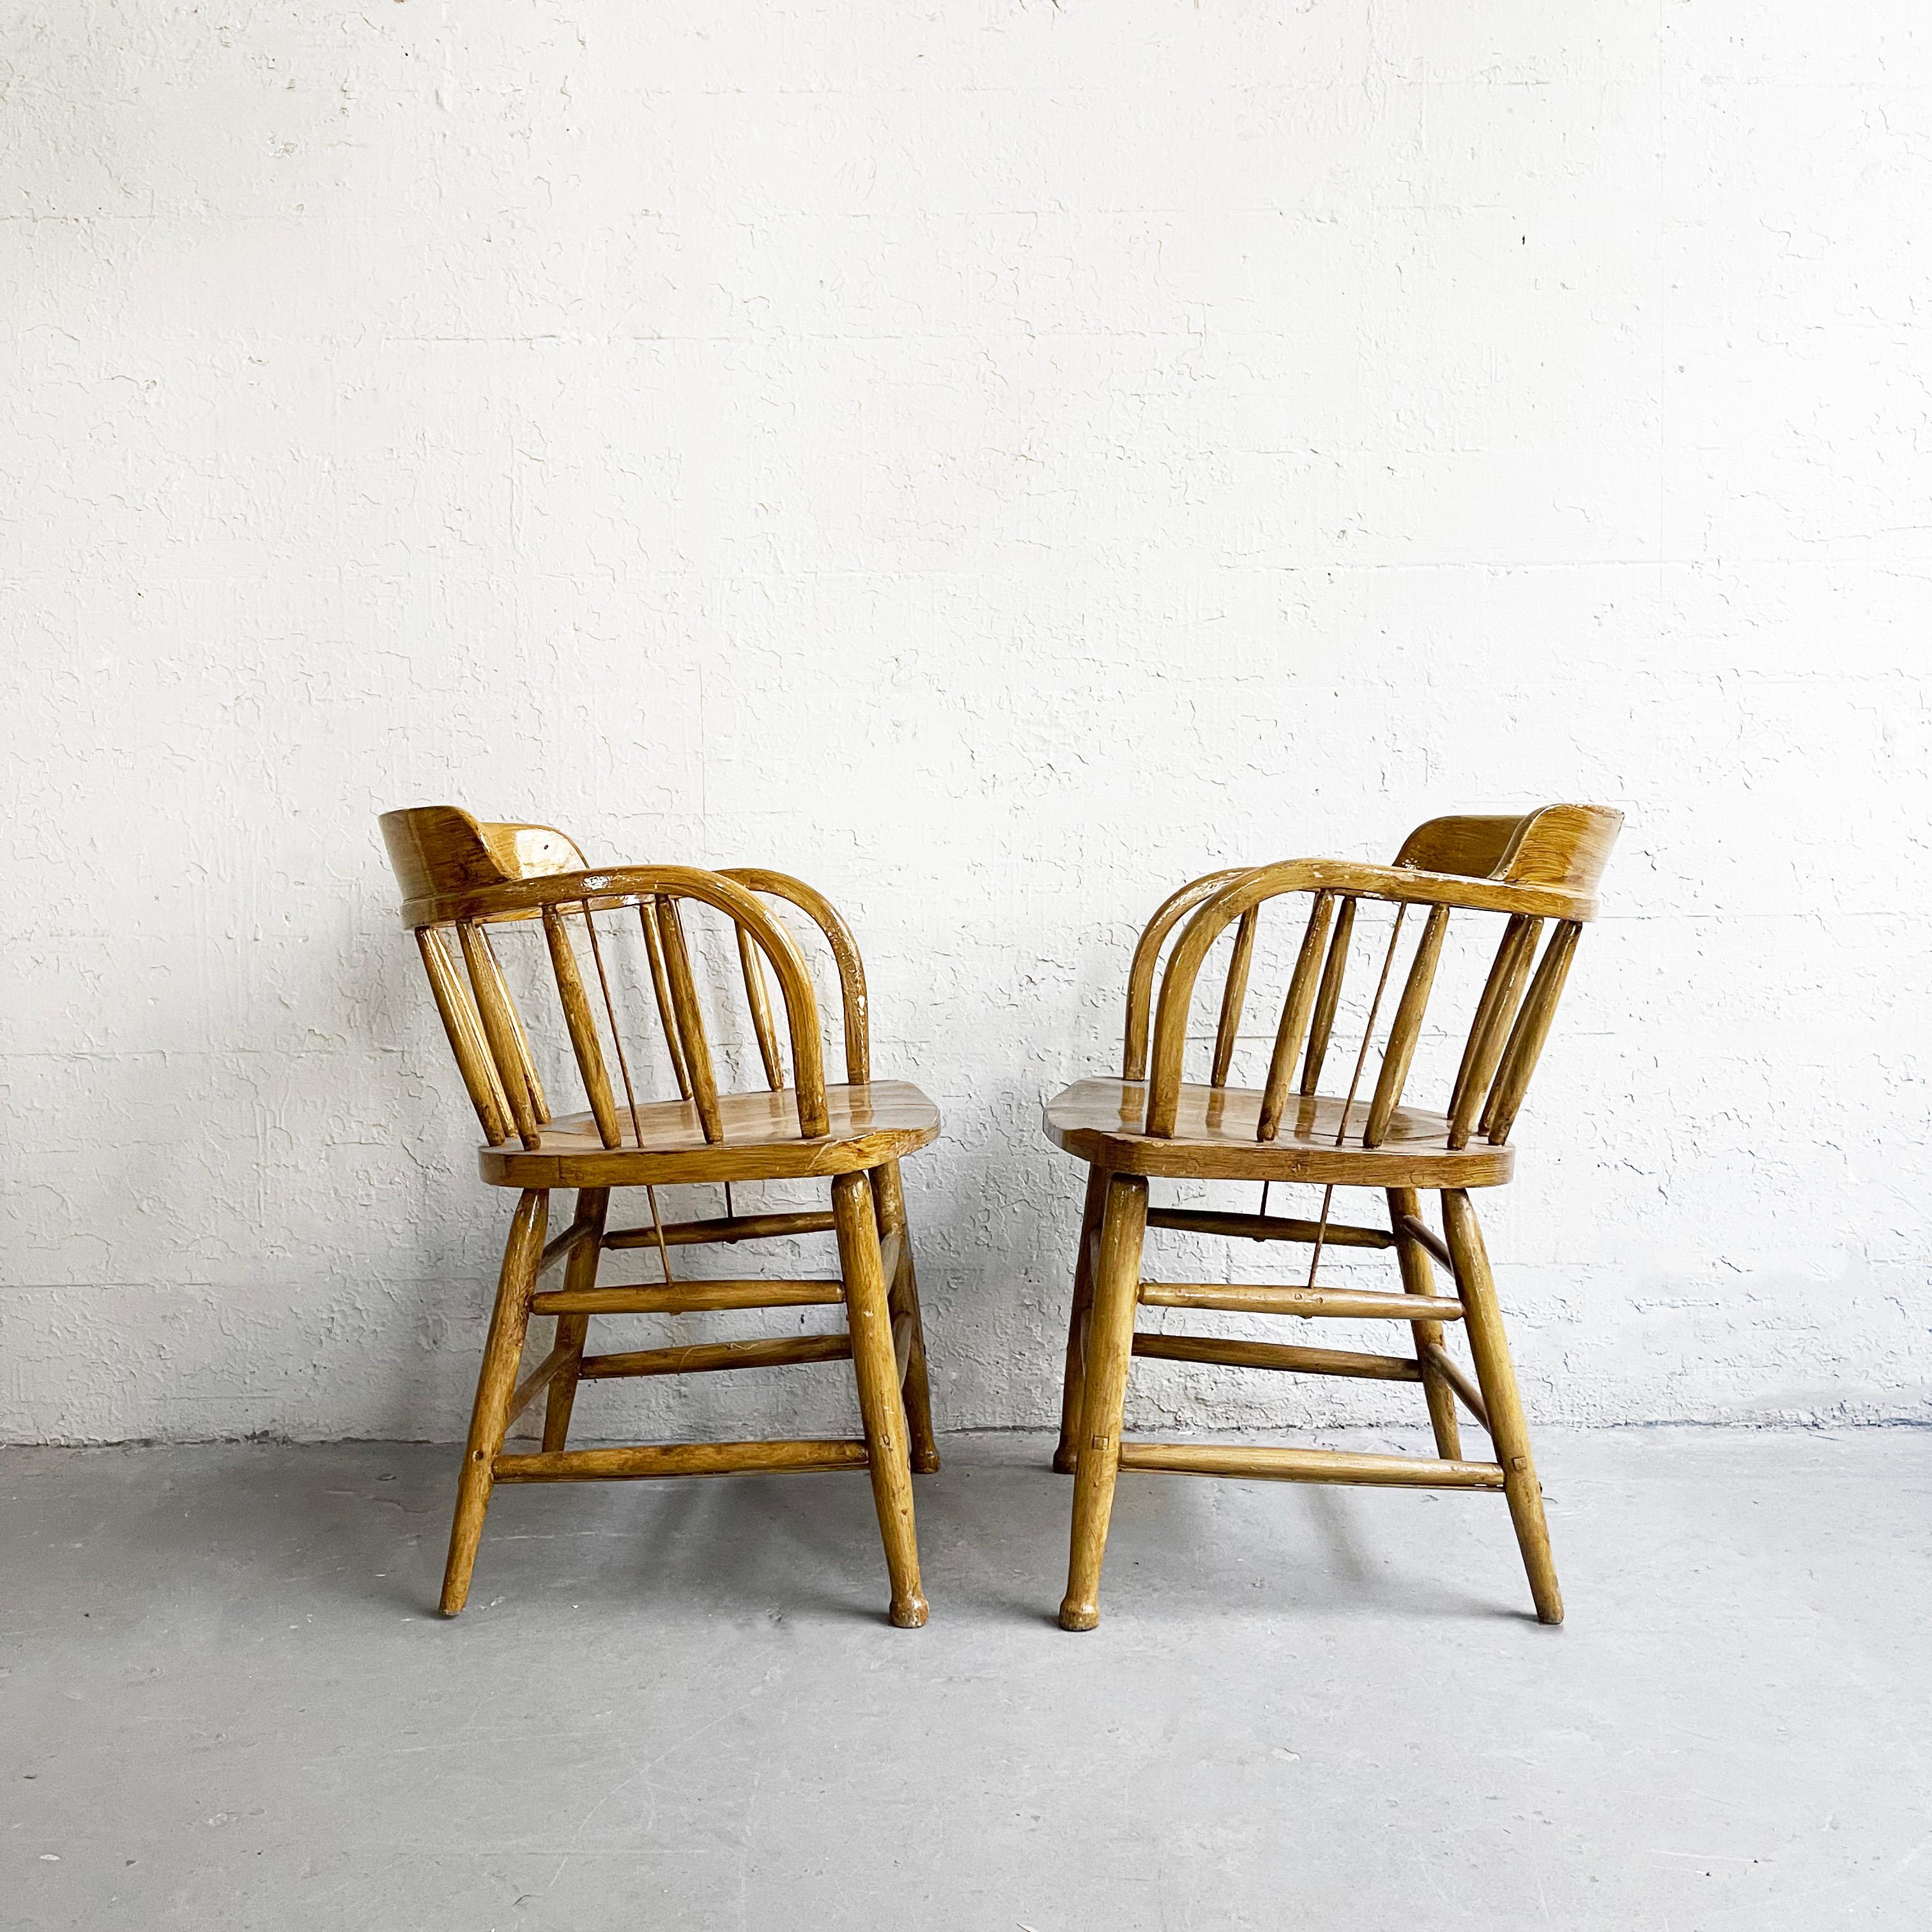 American Early 20th Century, Rustic Oak Firehouse Dining Chairs